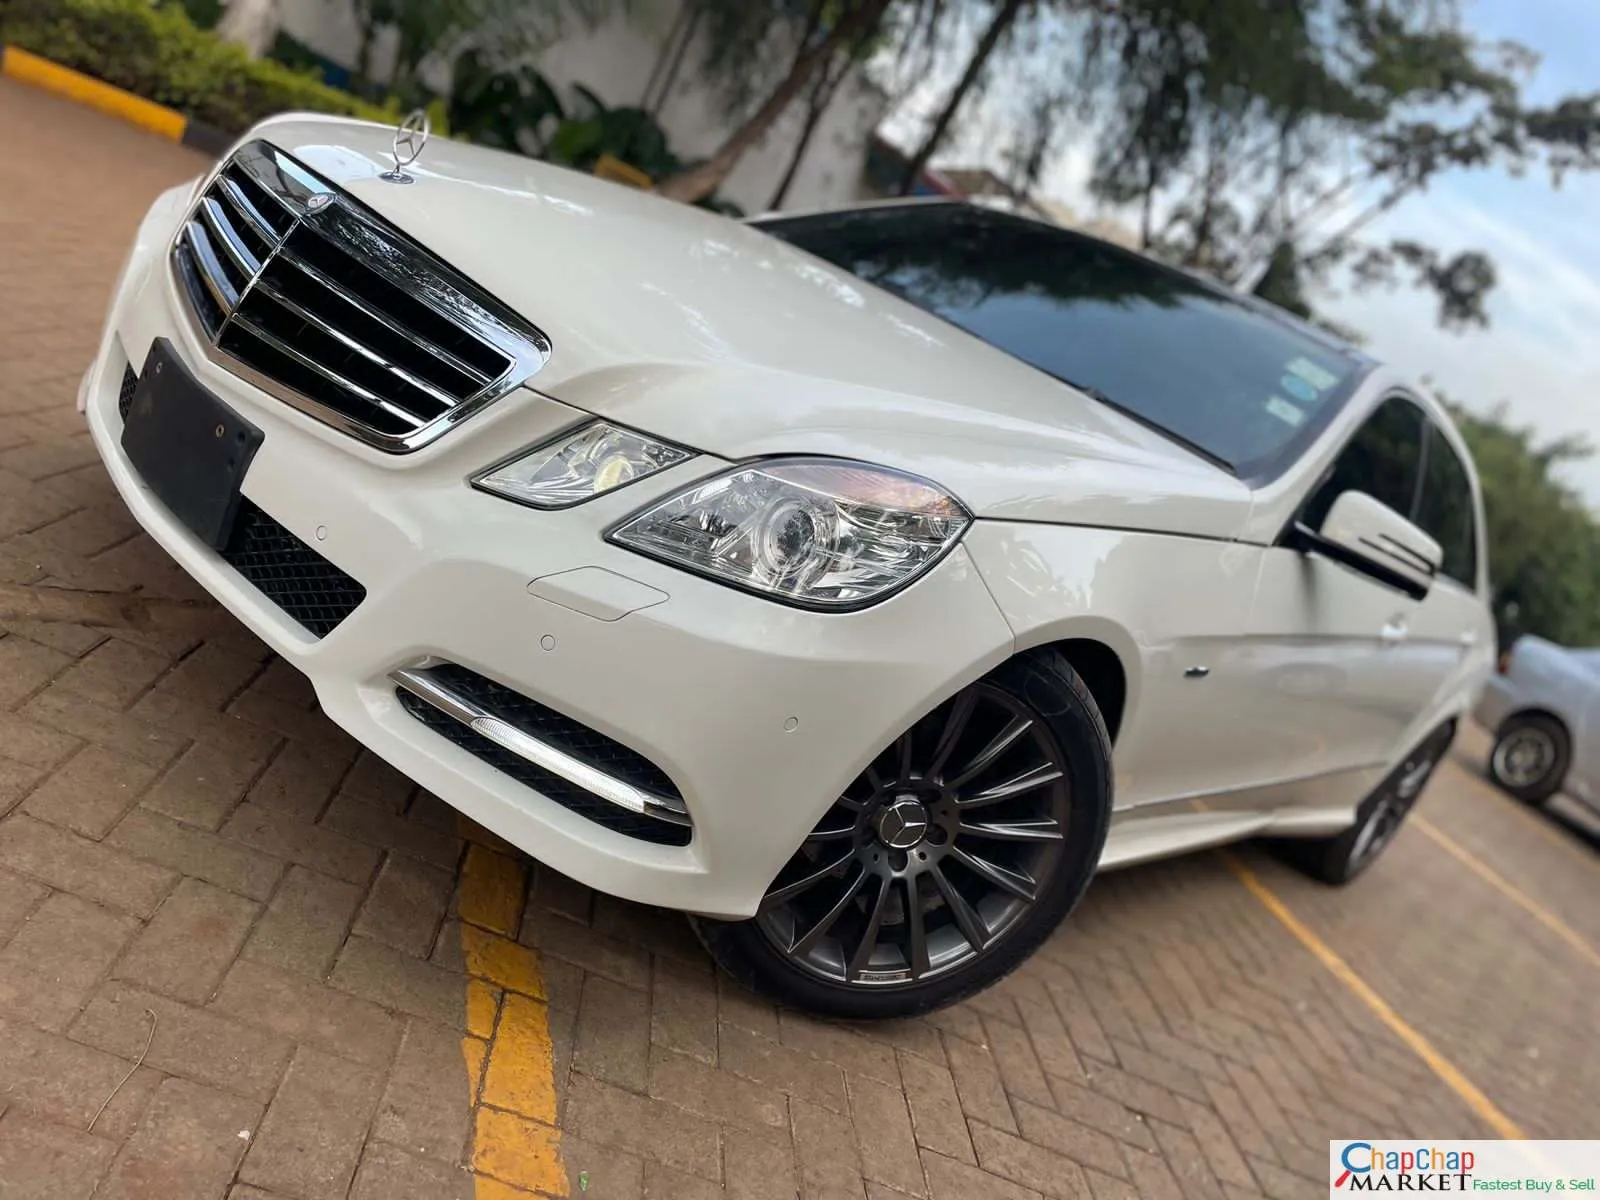 Mercedes Benz E250 panoramic SUNROOF QUICK SALE You Pay 30% DEPOSIT Trade in OK Hire purchase installments